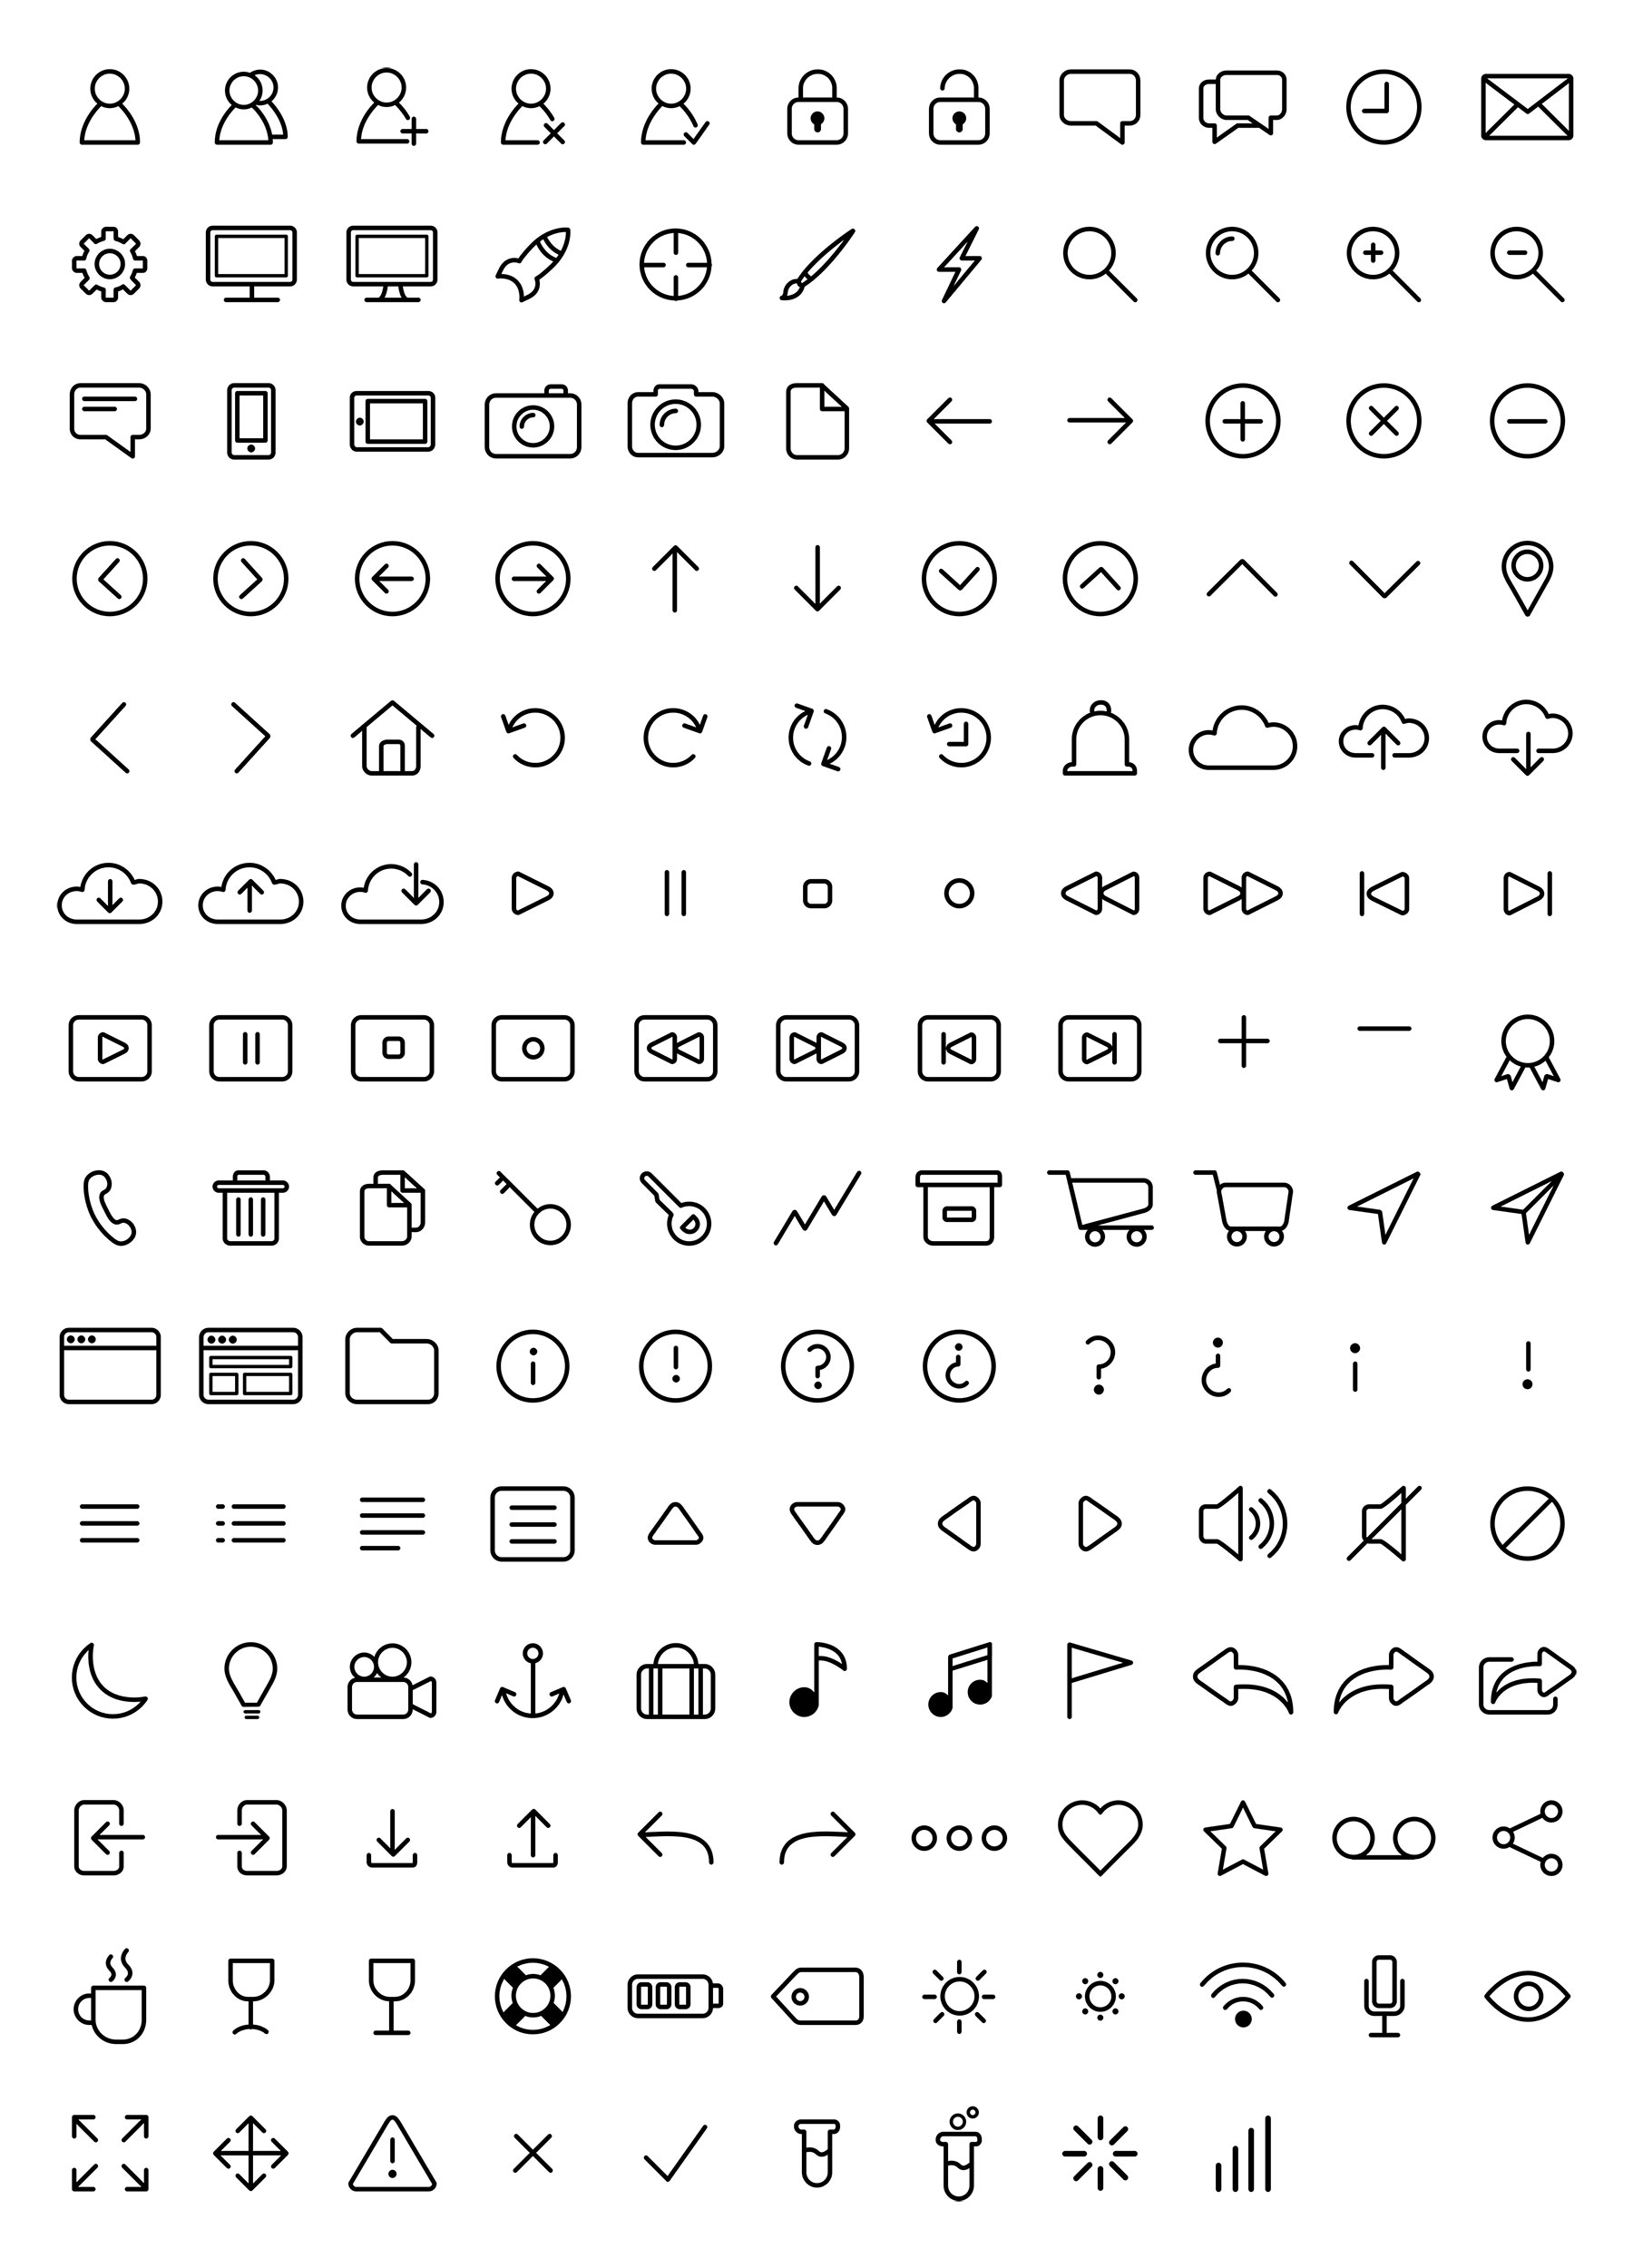 someicons@2x.jpg